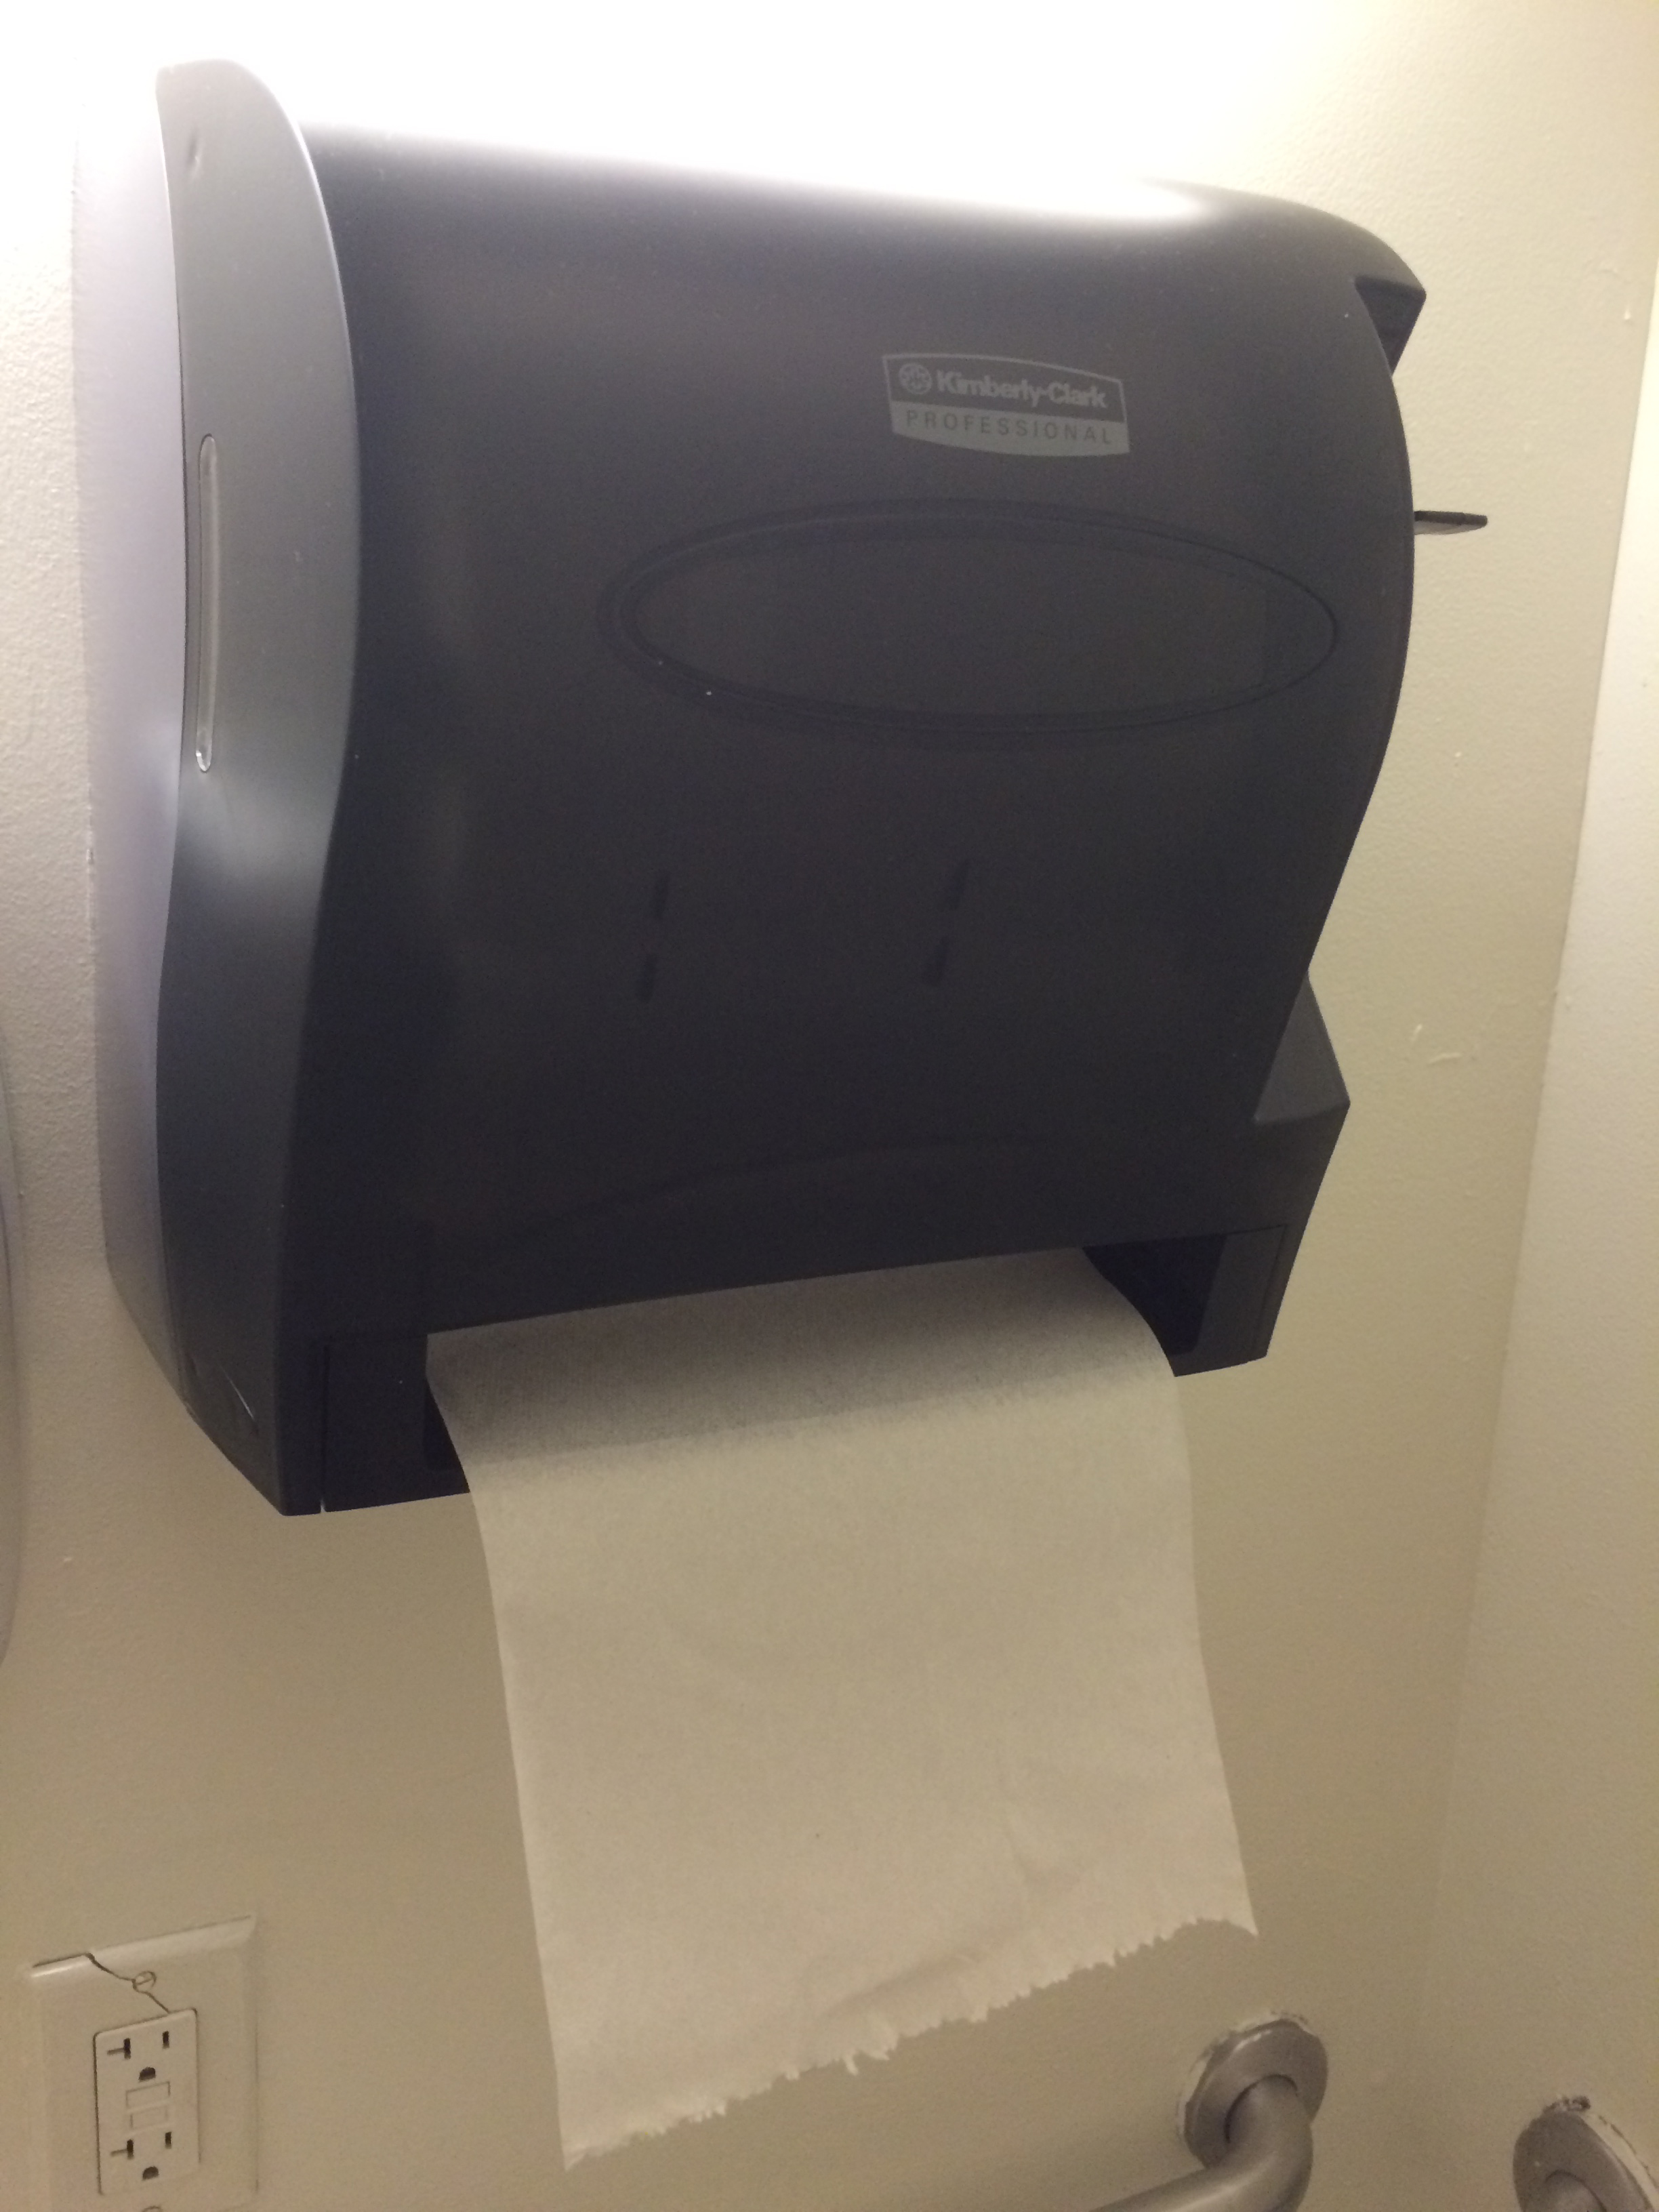 Paper Dispensers at the New School